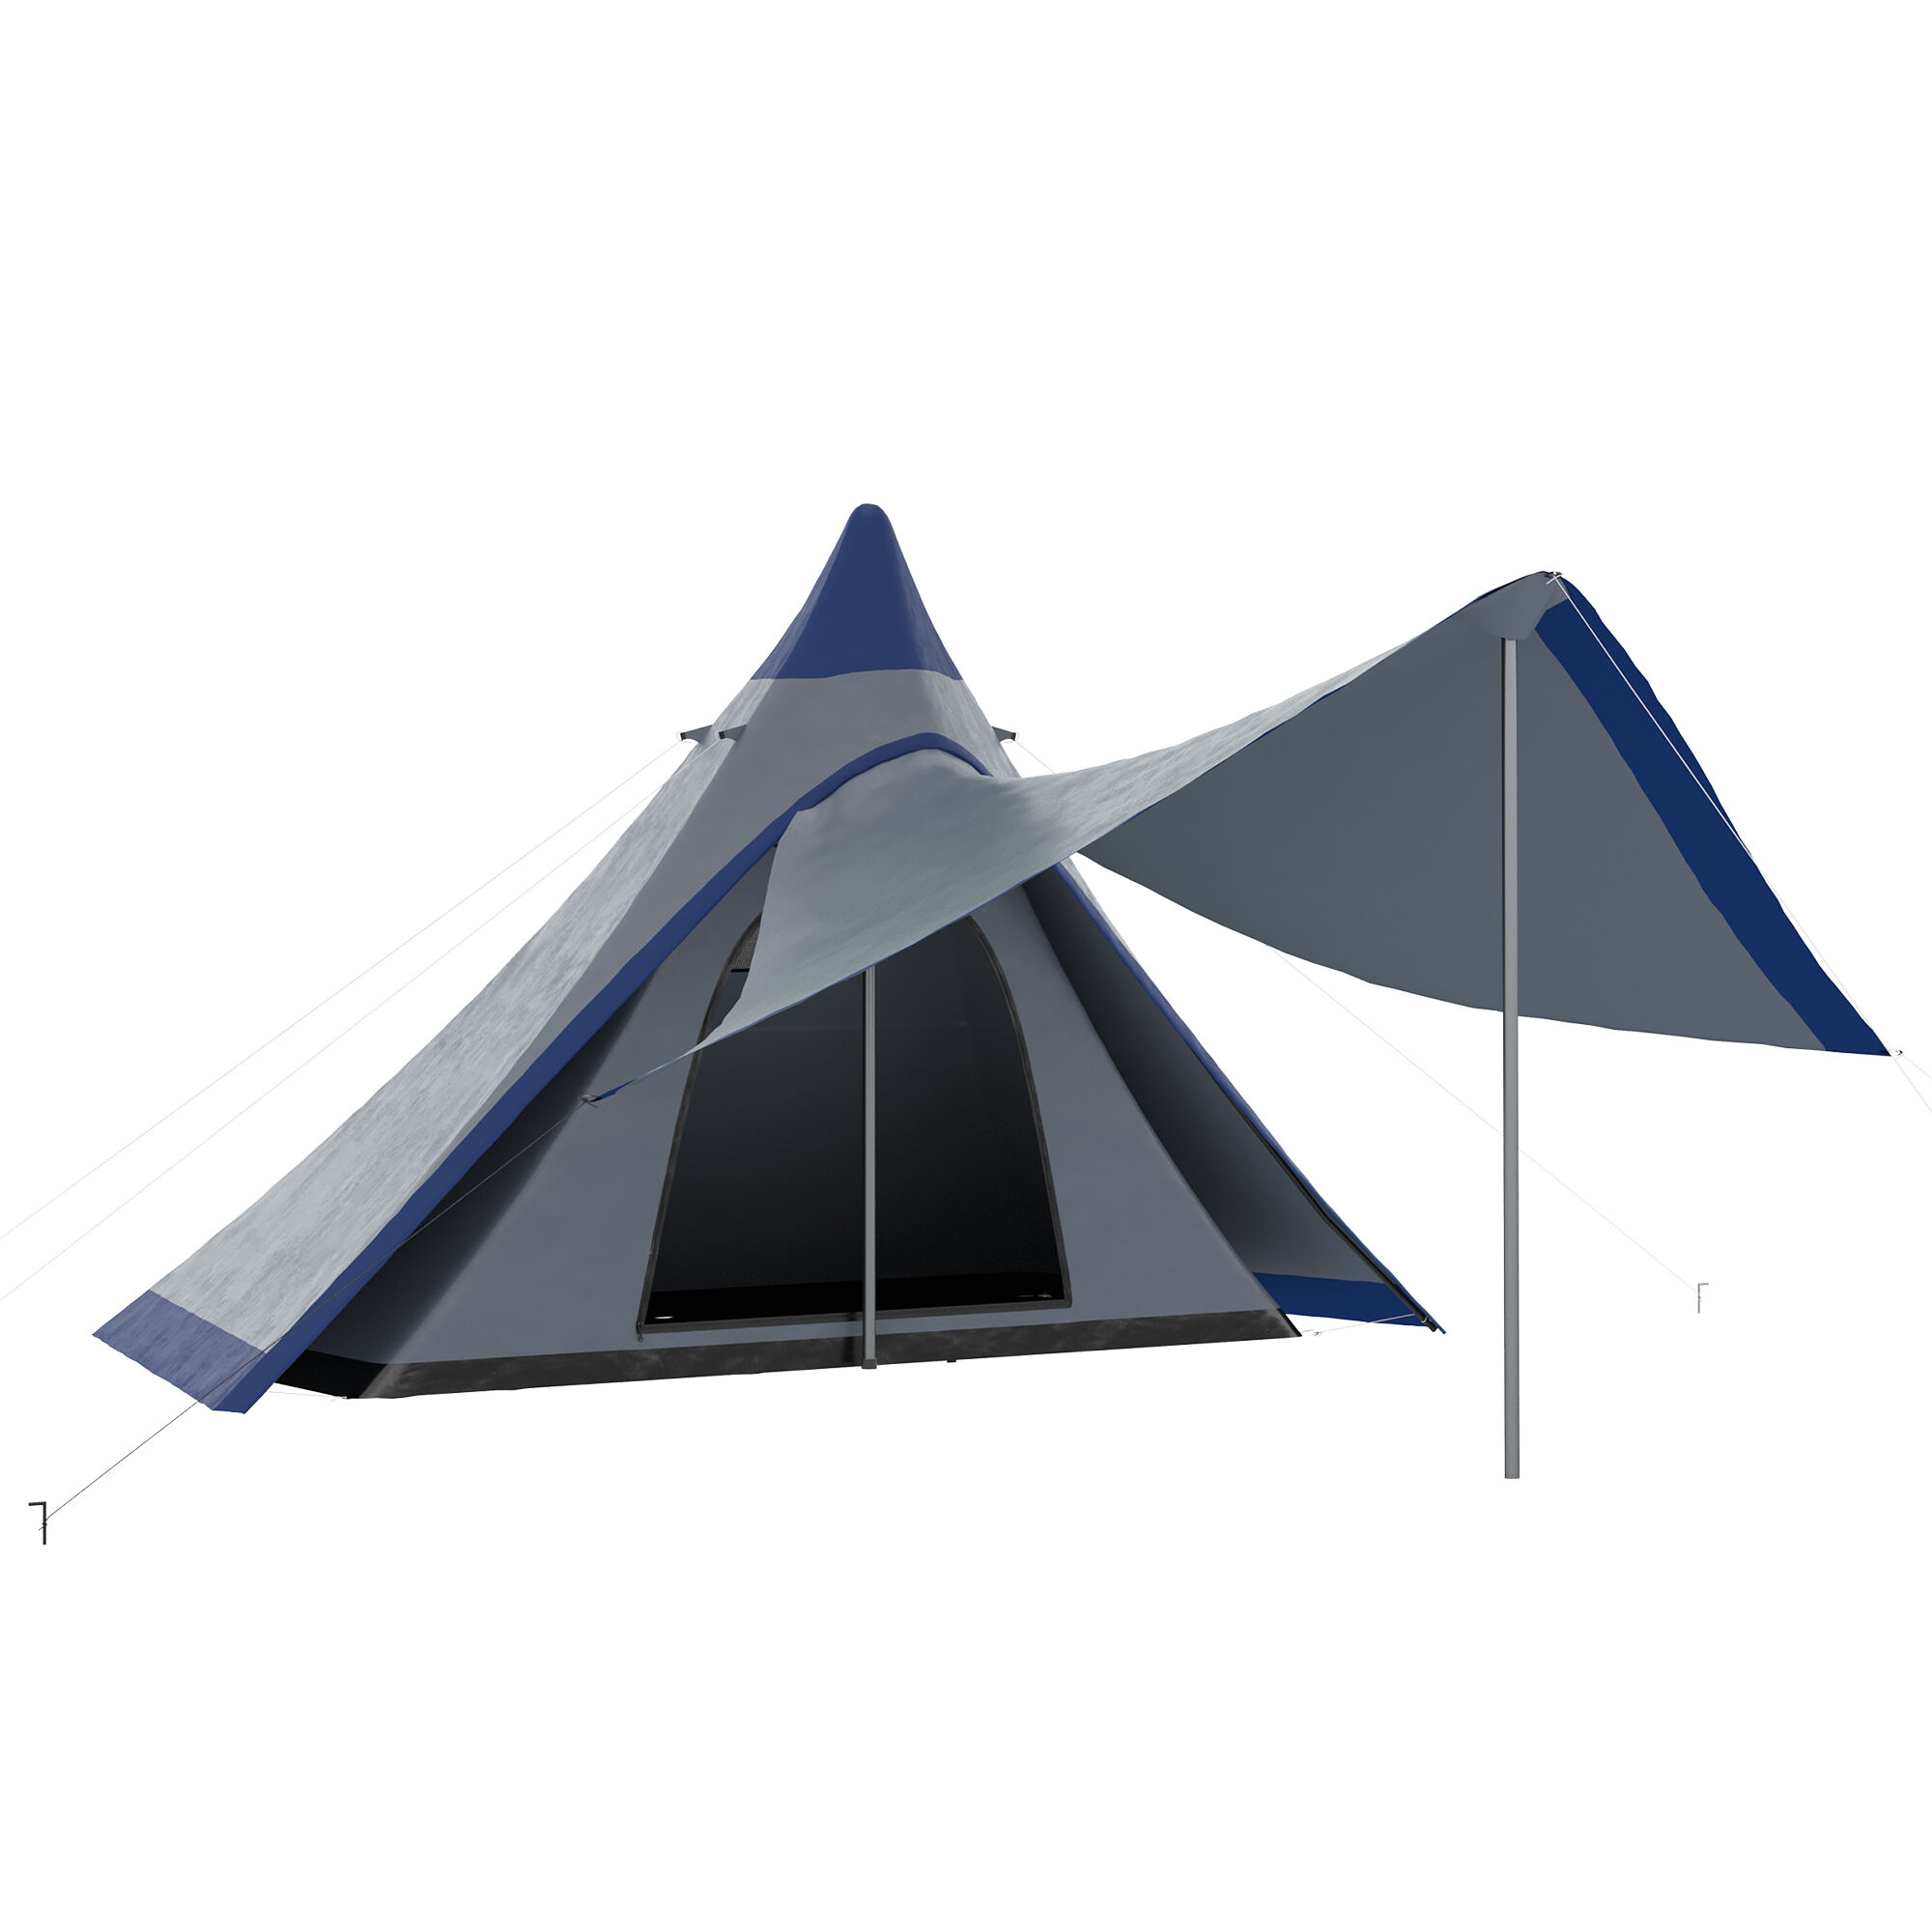 Outsunny Teepee Camping Tent Easy Set-Up with Porch Blue for 2-3 Person Outdoor Hiking   Aosom.com